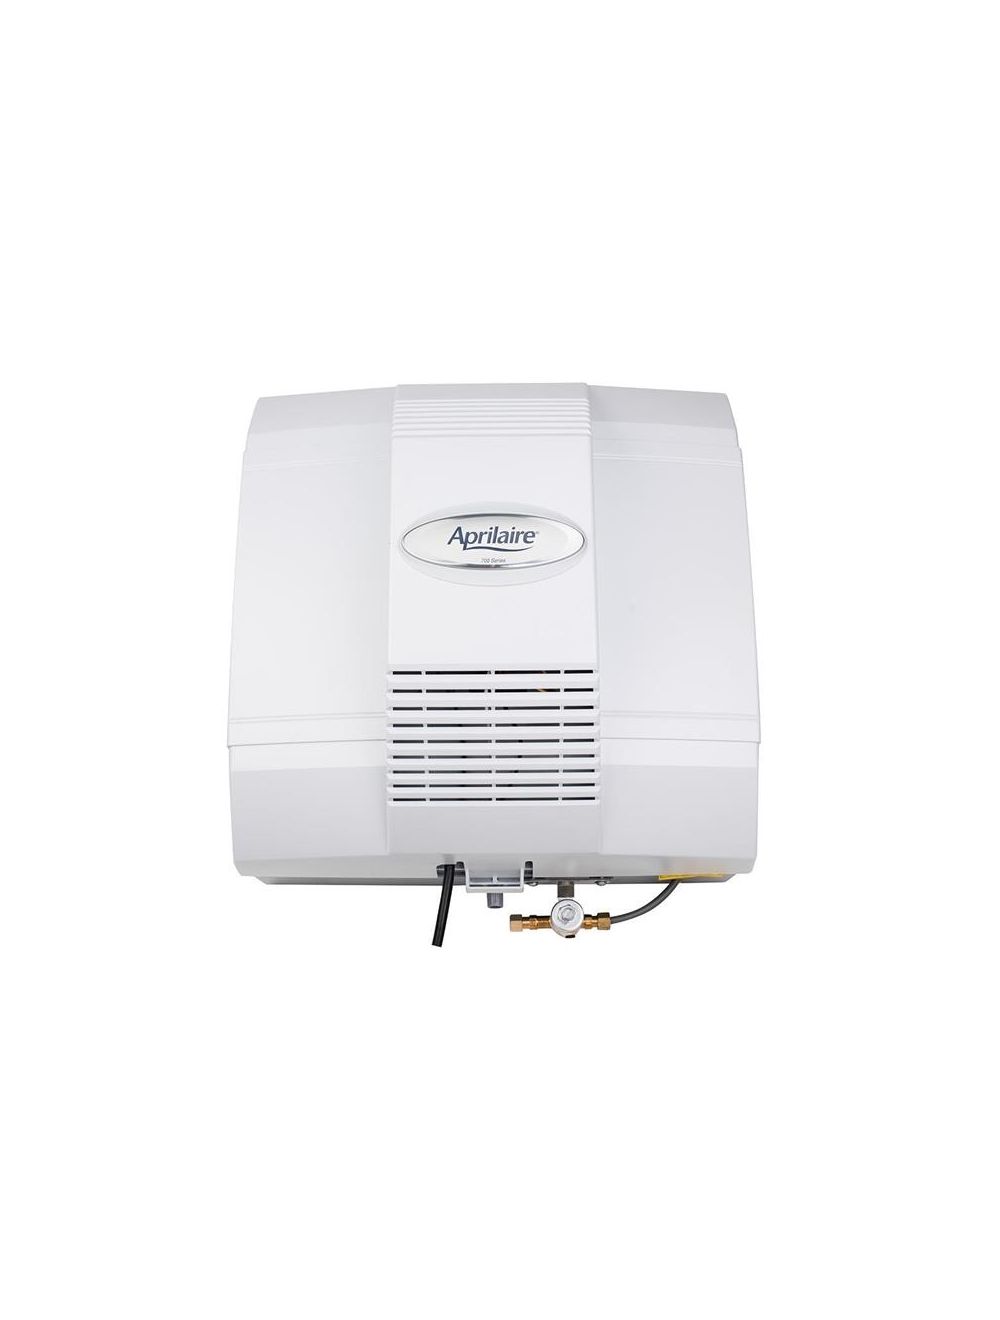 Aprilaire Humidifier Model 700